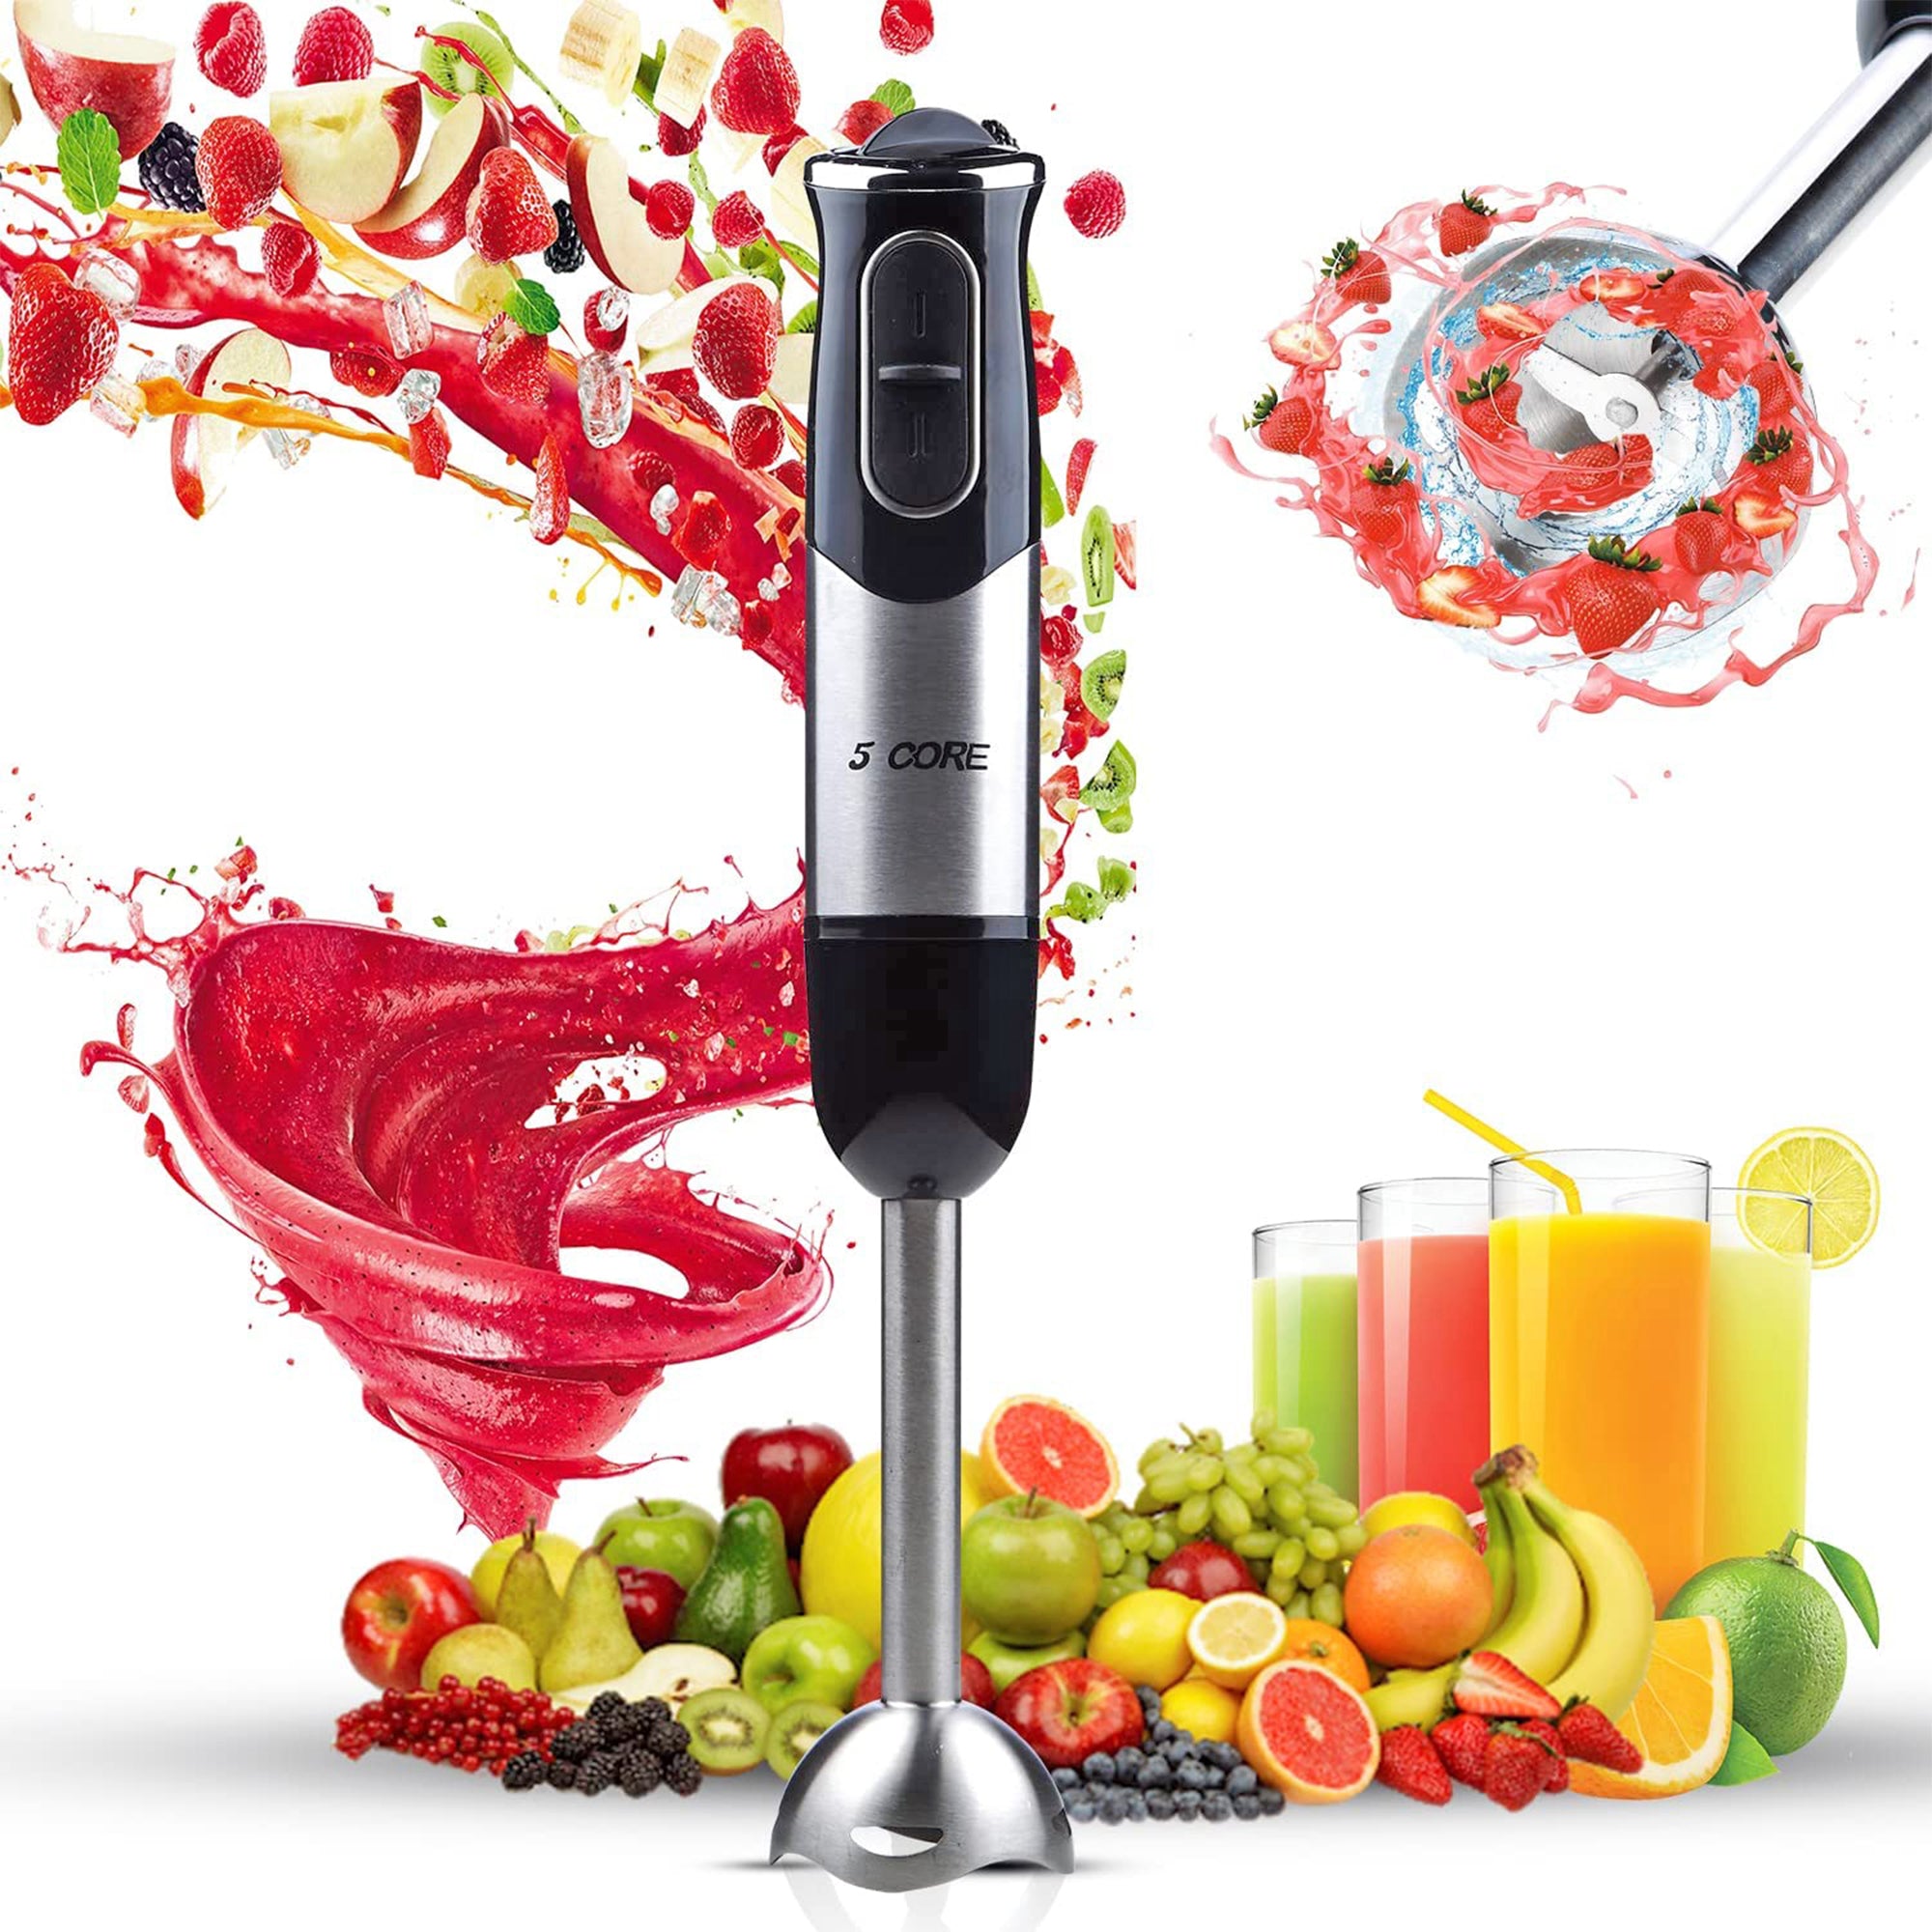 5 Core 500W Immersion Blender Handheld w/ Stainless Steel Blades, High-Performance Motor